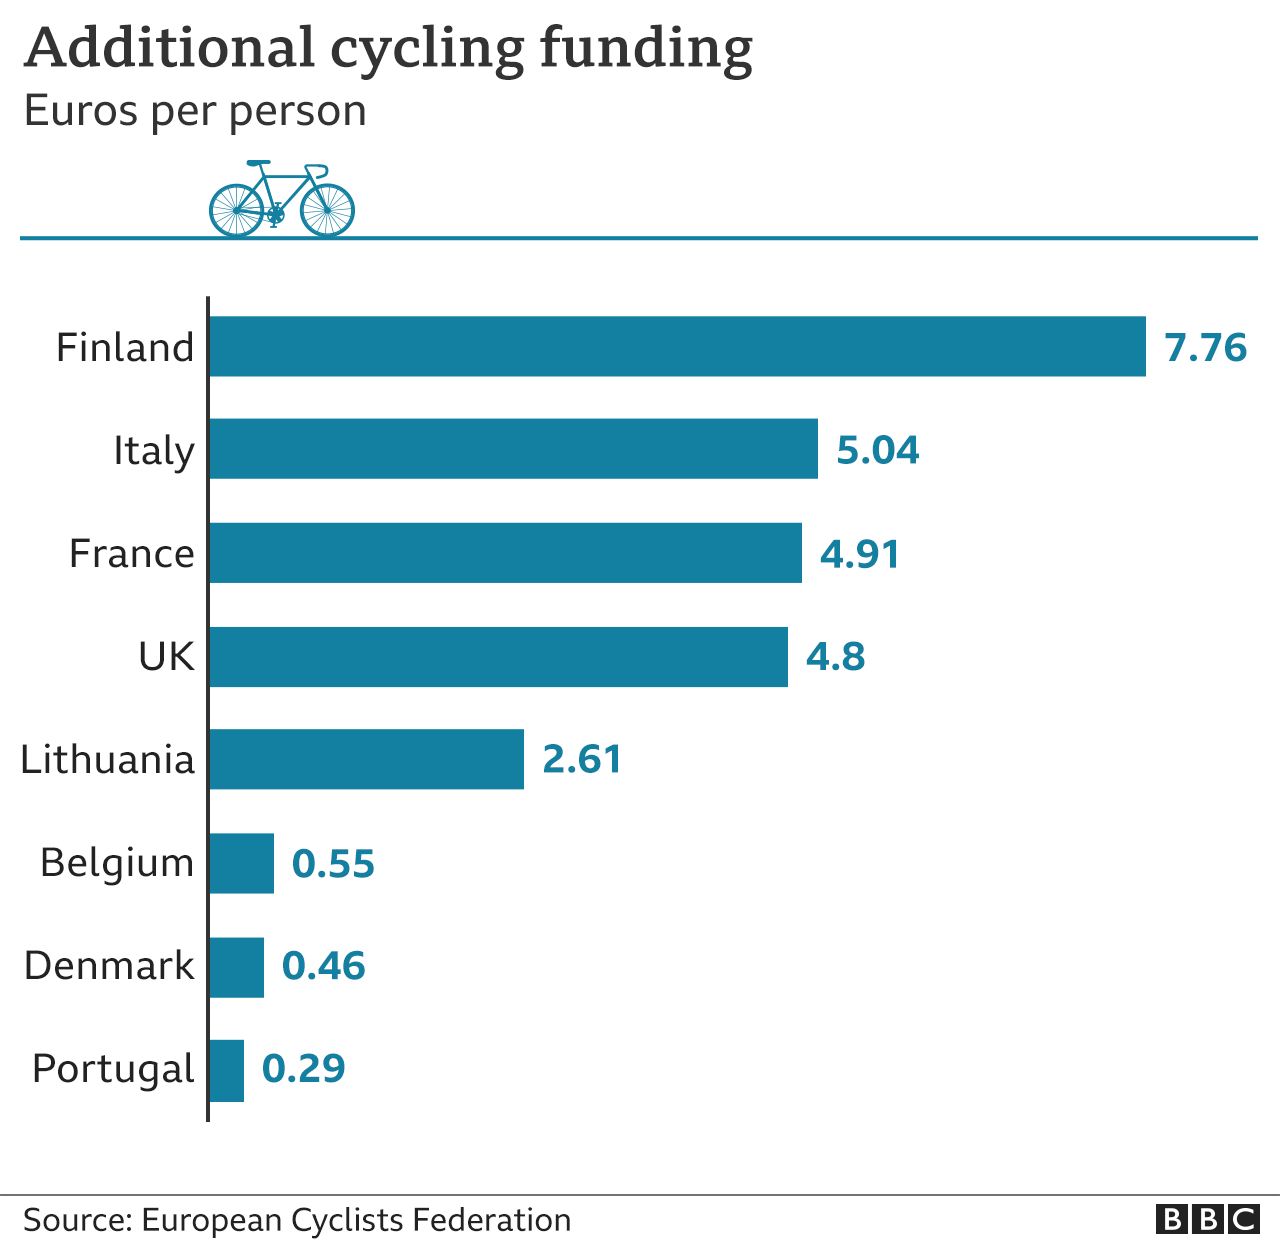 Graphic showing additional cycling investment around Europe per person